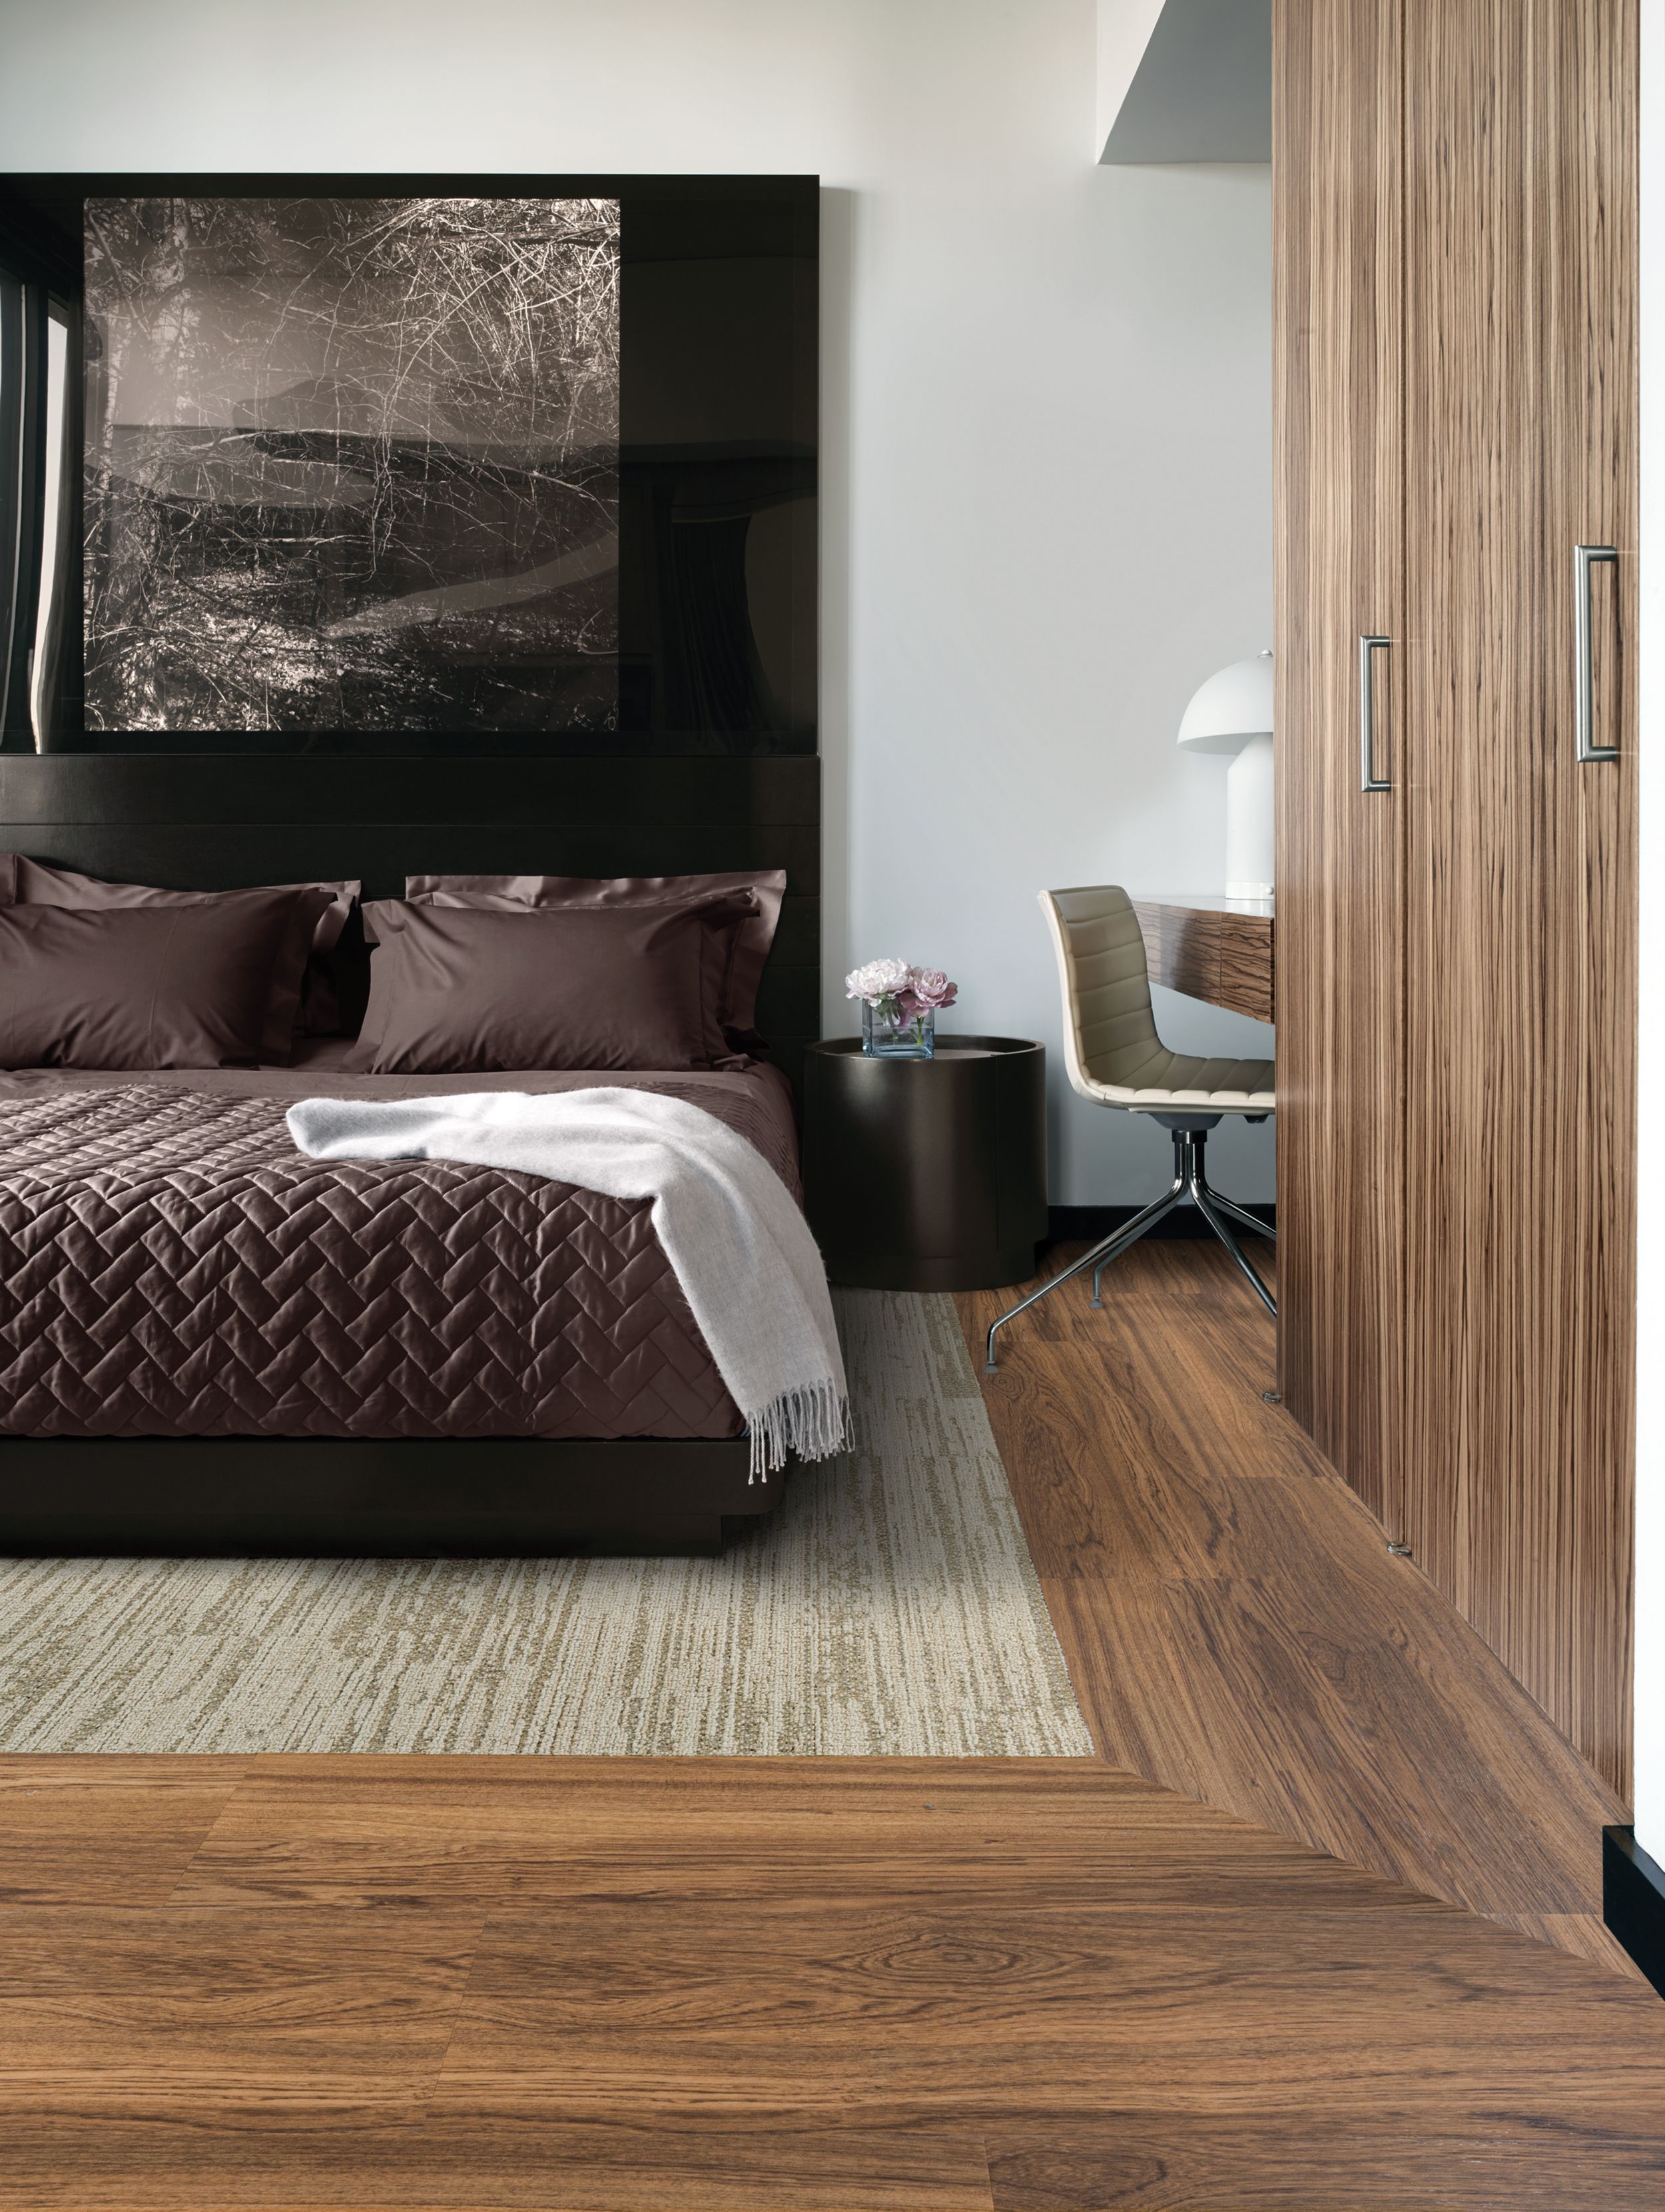 Interface RMS 510 plank carpet tile with Natural Woodograins LVT in hotel guest room with robe on bed imagen número 1